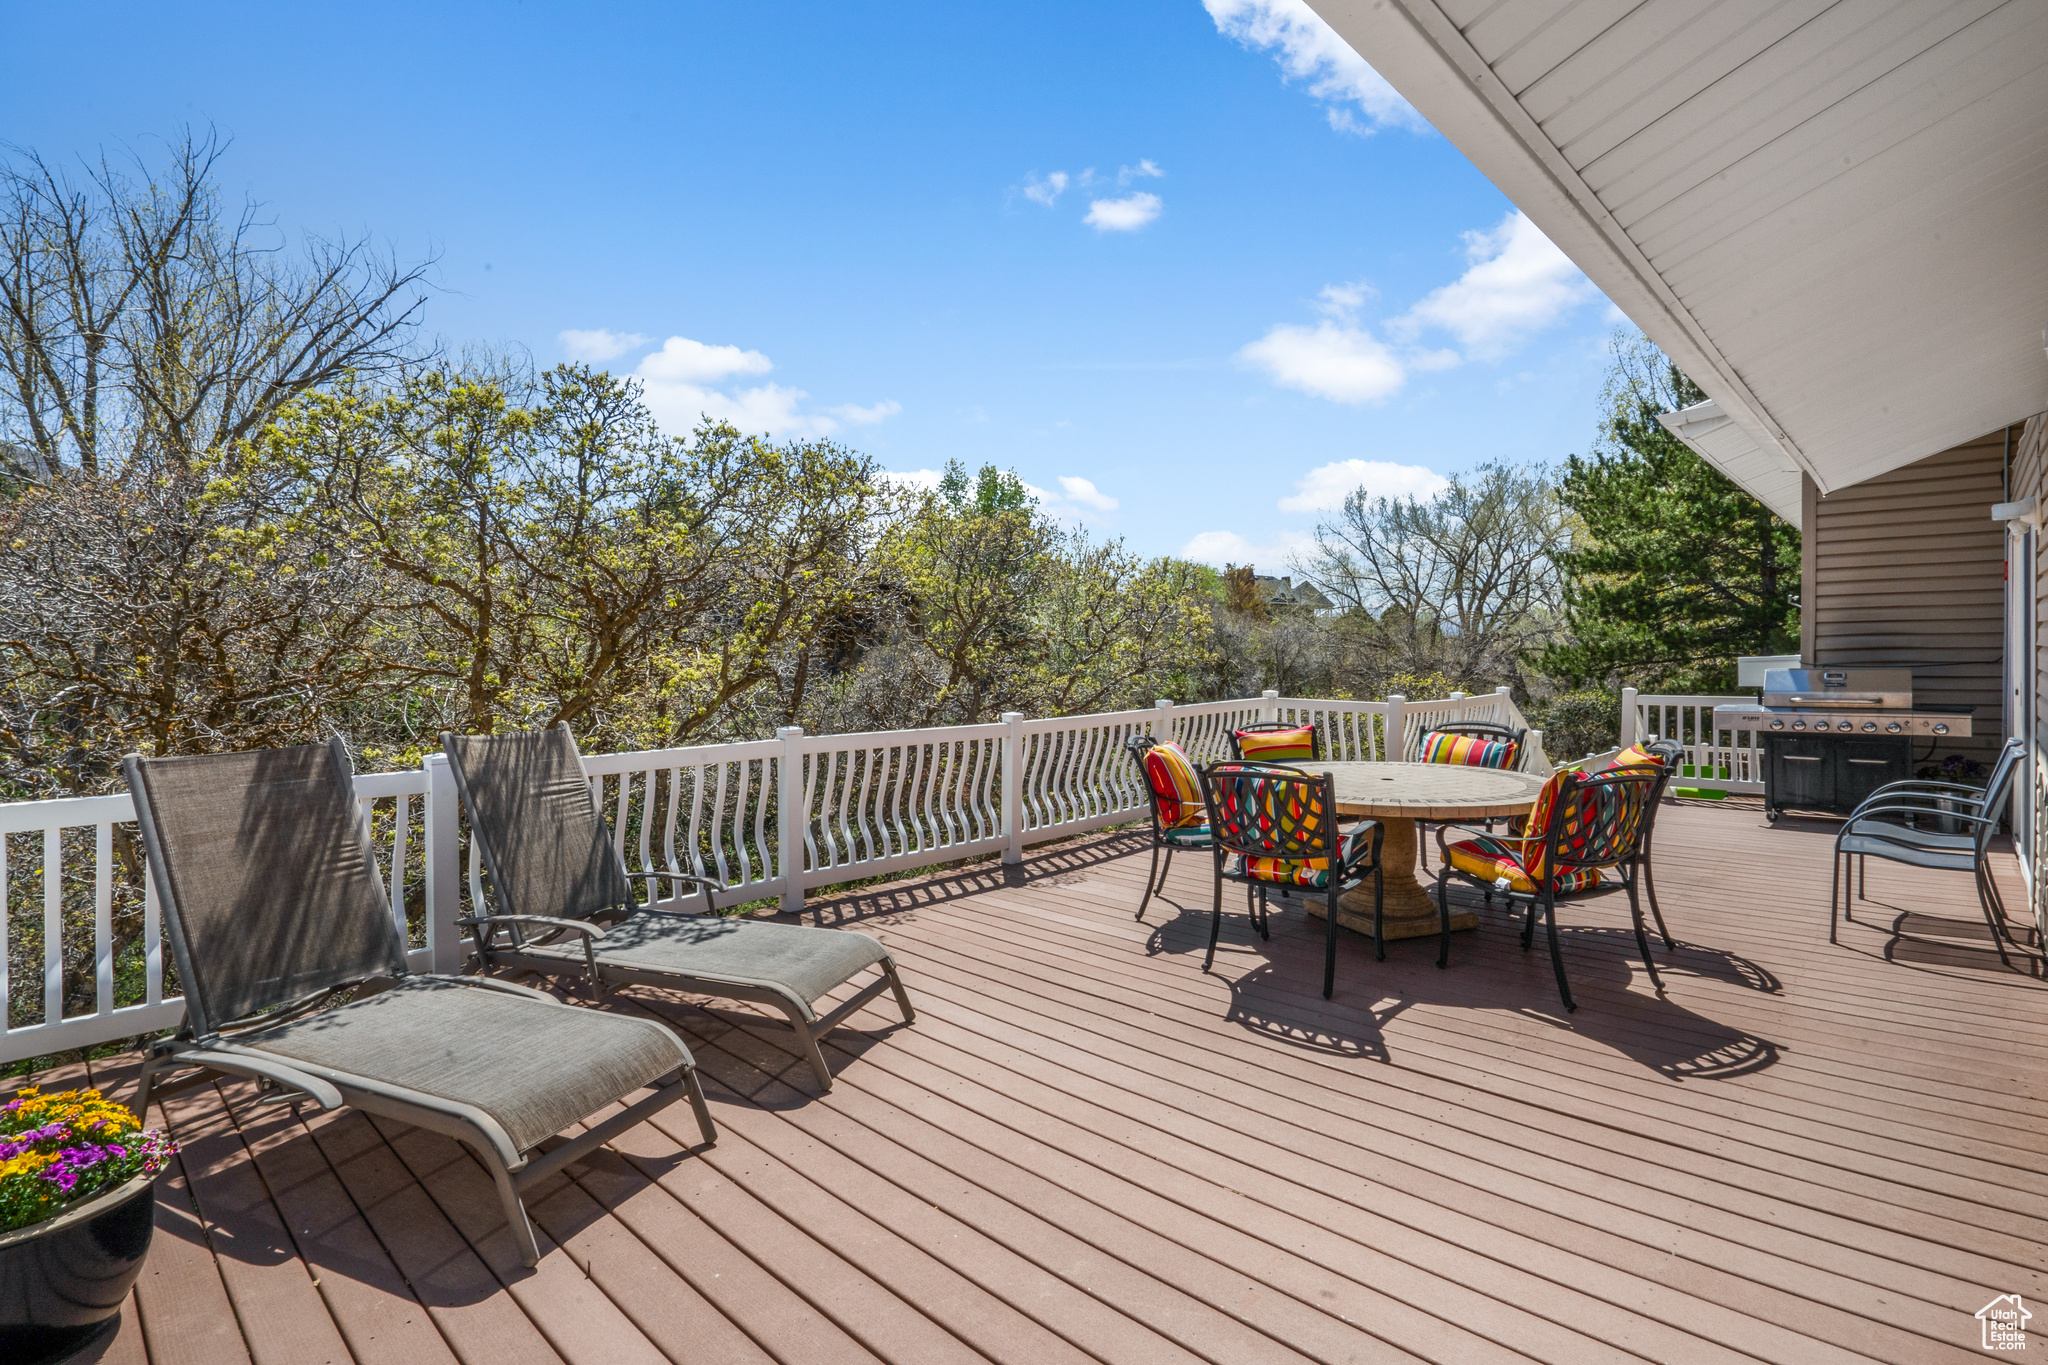 Step outside onto this Deck from formal dining and kitchen